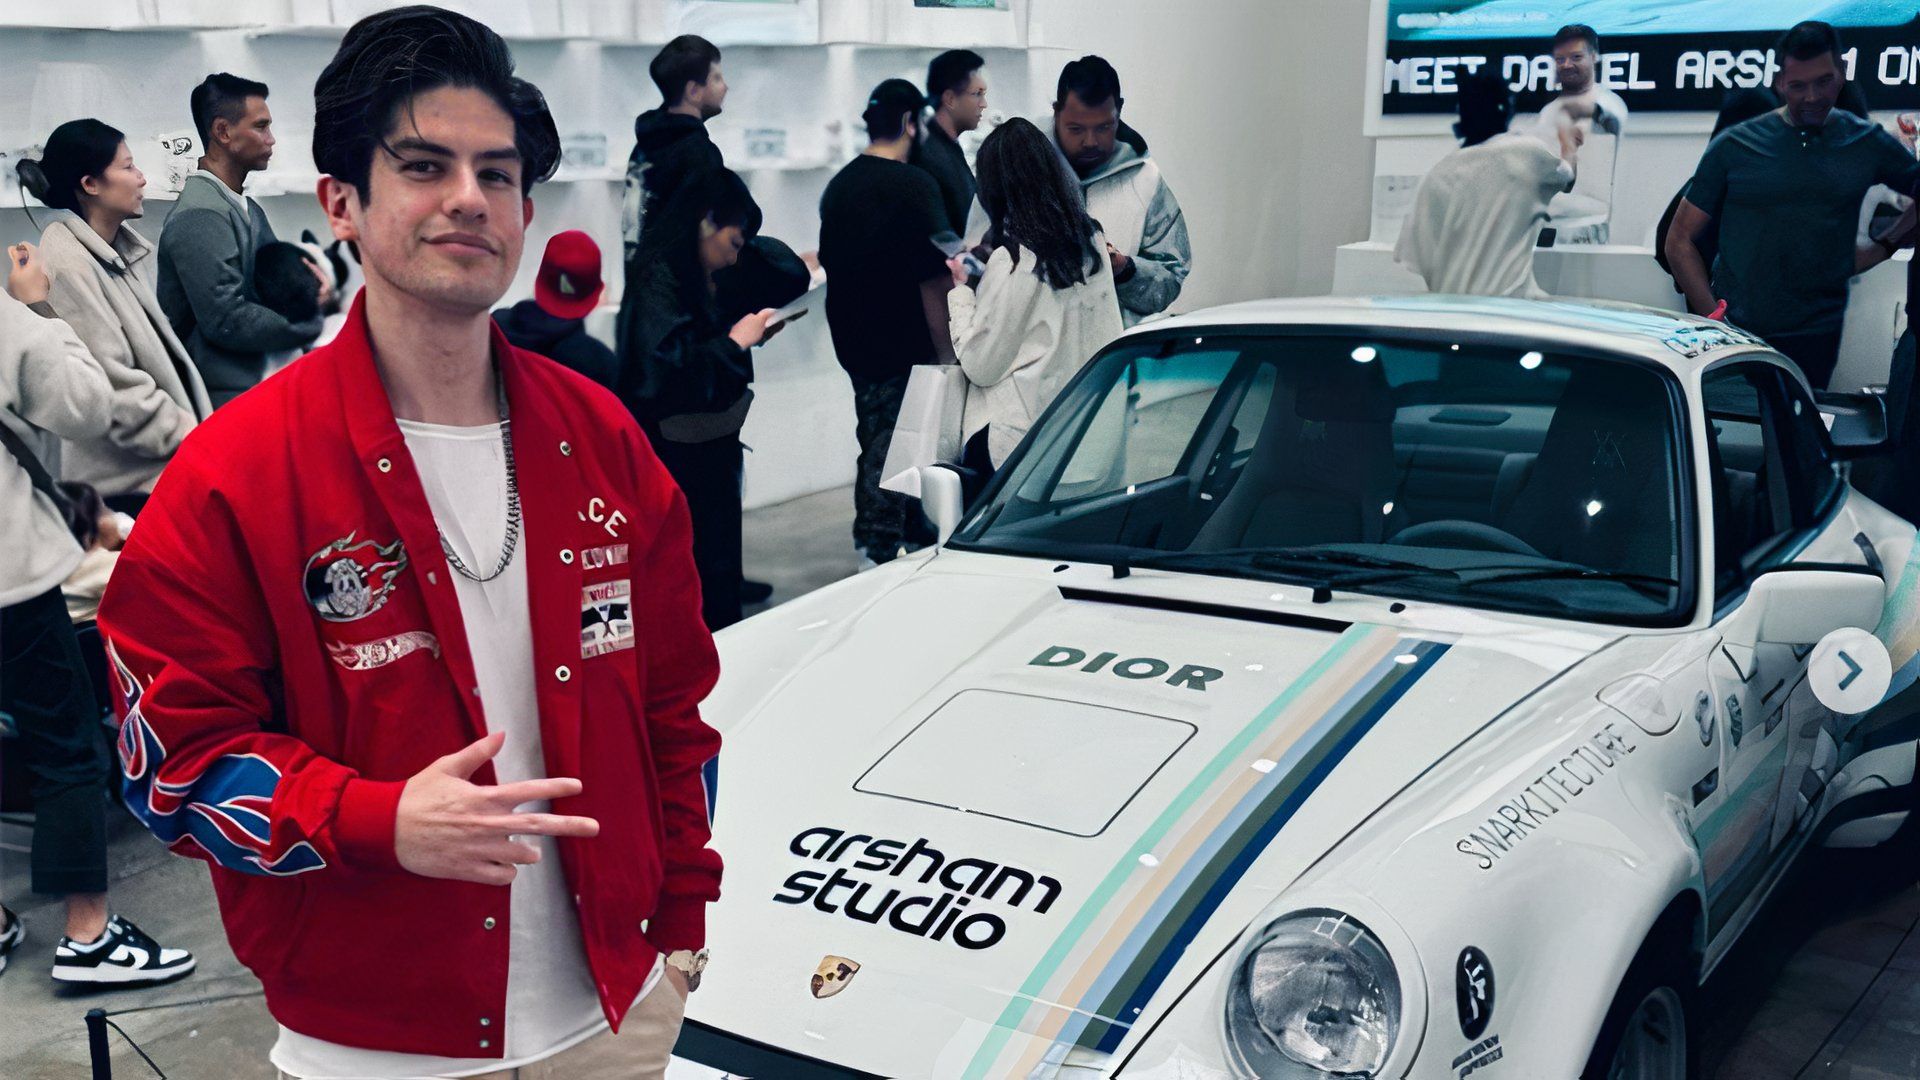 HOT WHEELS DESIGNER CHARLIE ANGULO at an event